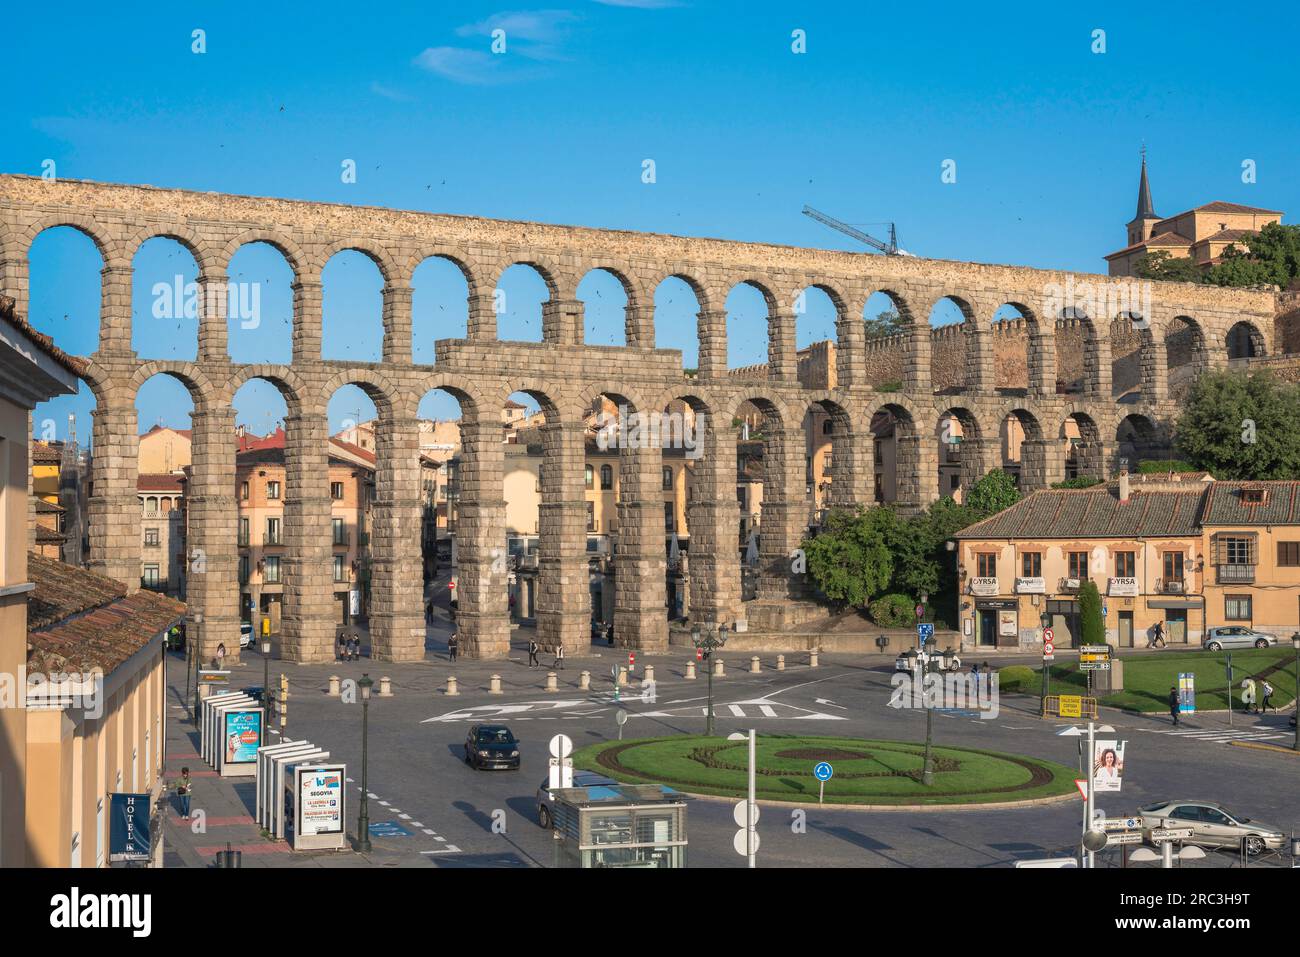 Spain Roman building, view of the 1st Century aqueduct spanning the city of Segovia, showing the Plaza Acueducto Oriental in the foreground, Spain Stock Photo